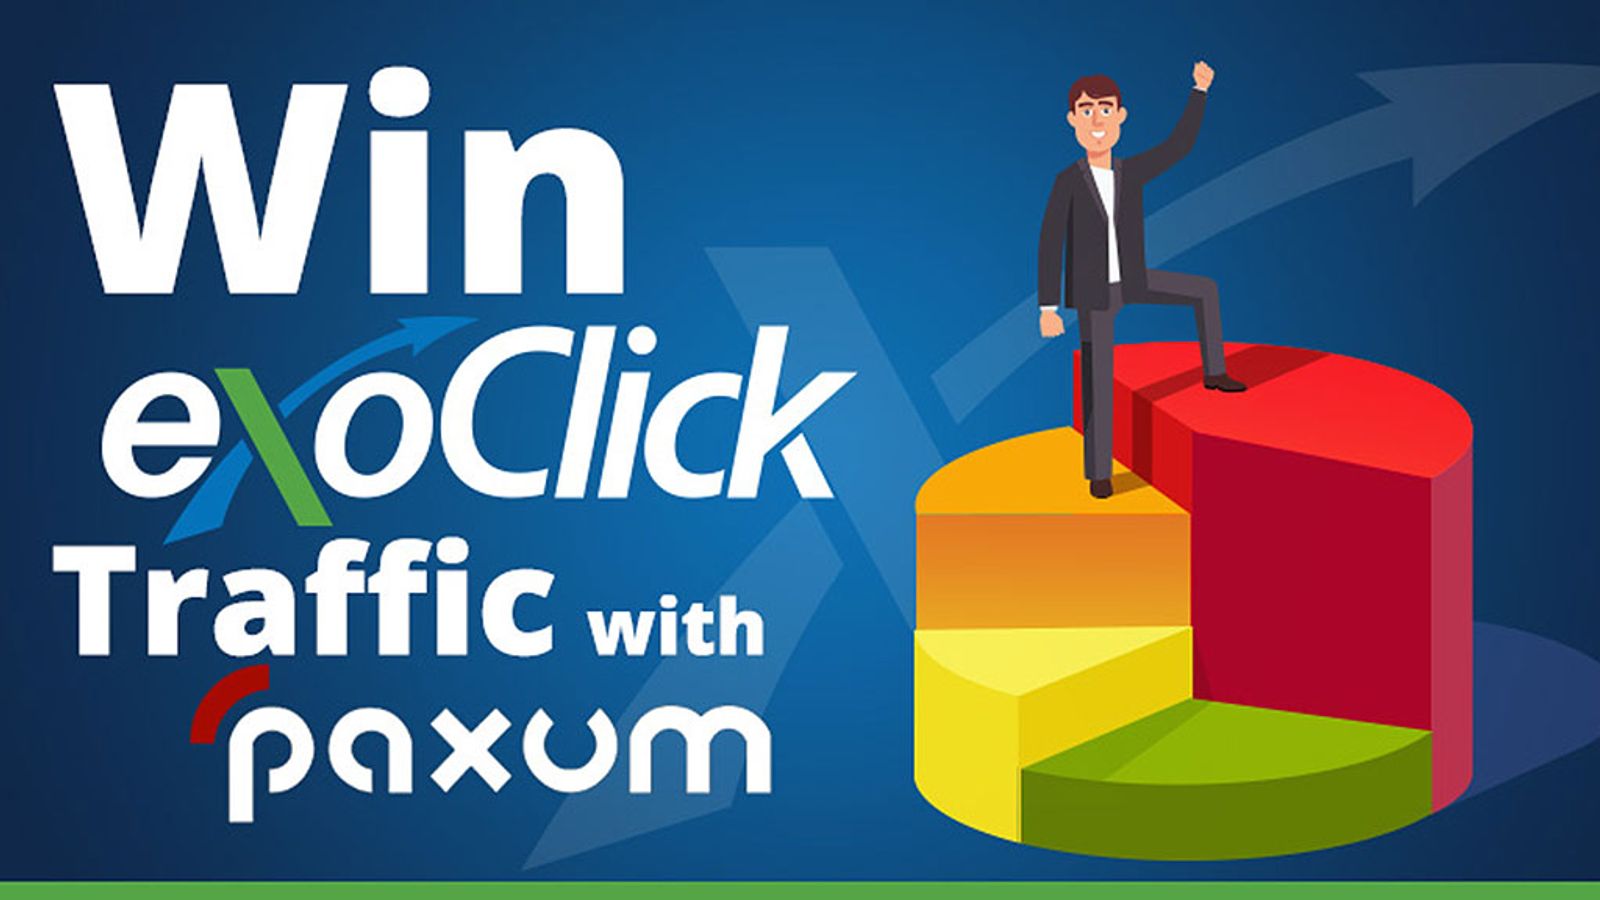 ExoClick Partners With Paxum, Offers Prizes In Traffic Contest